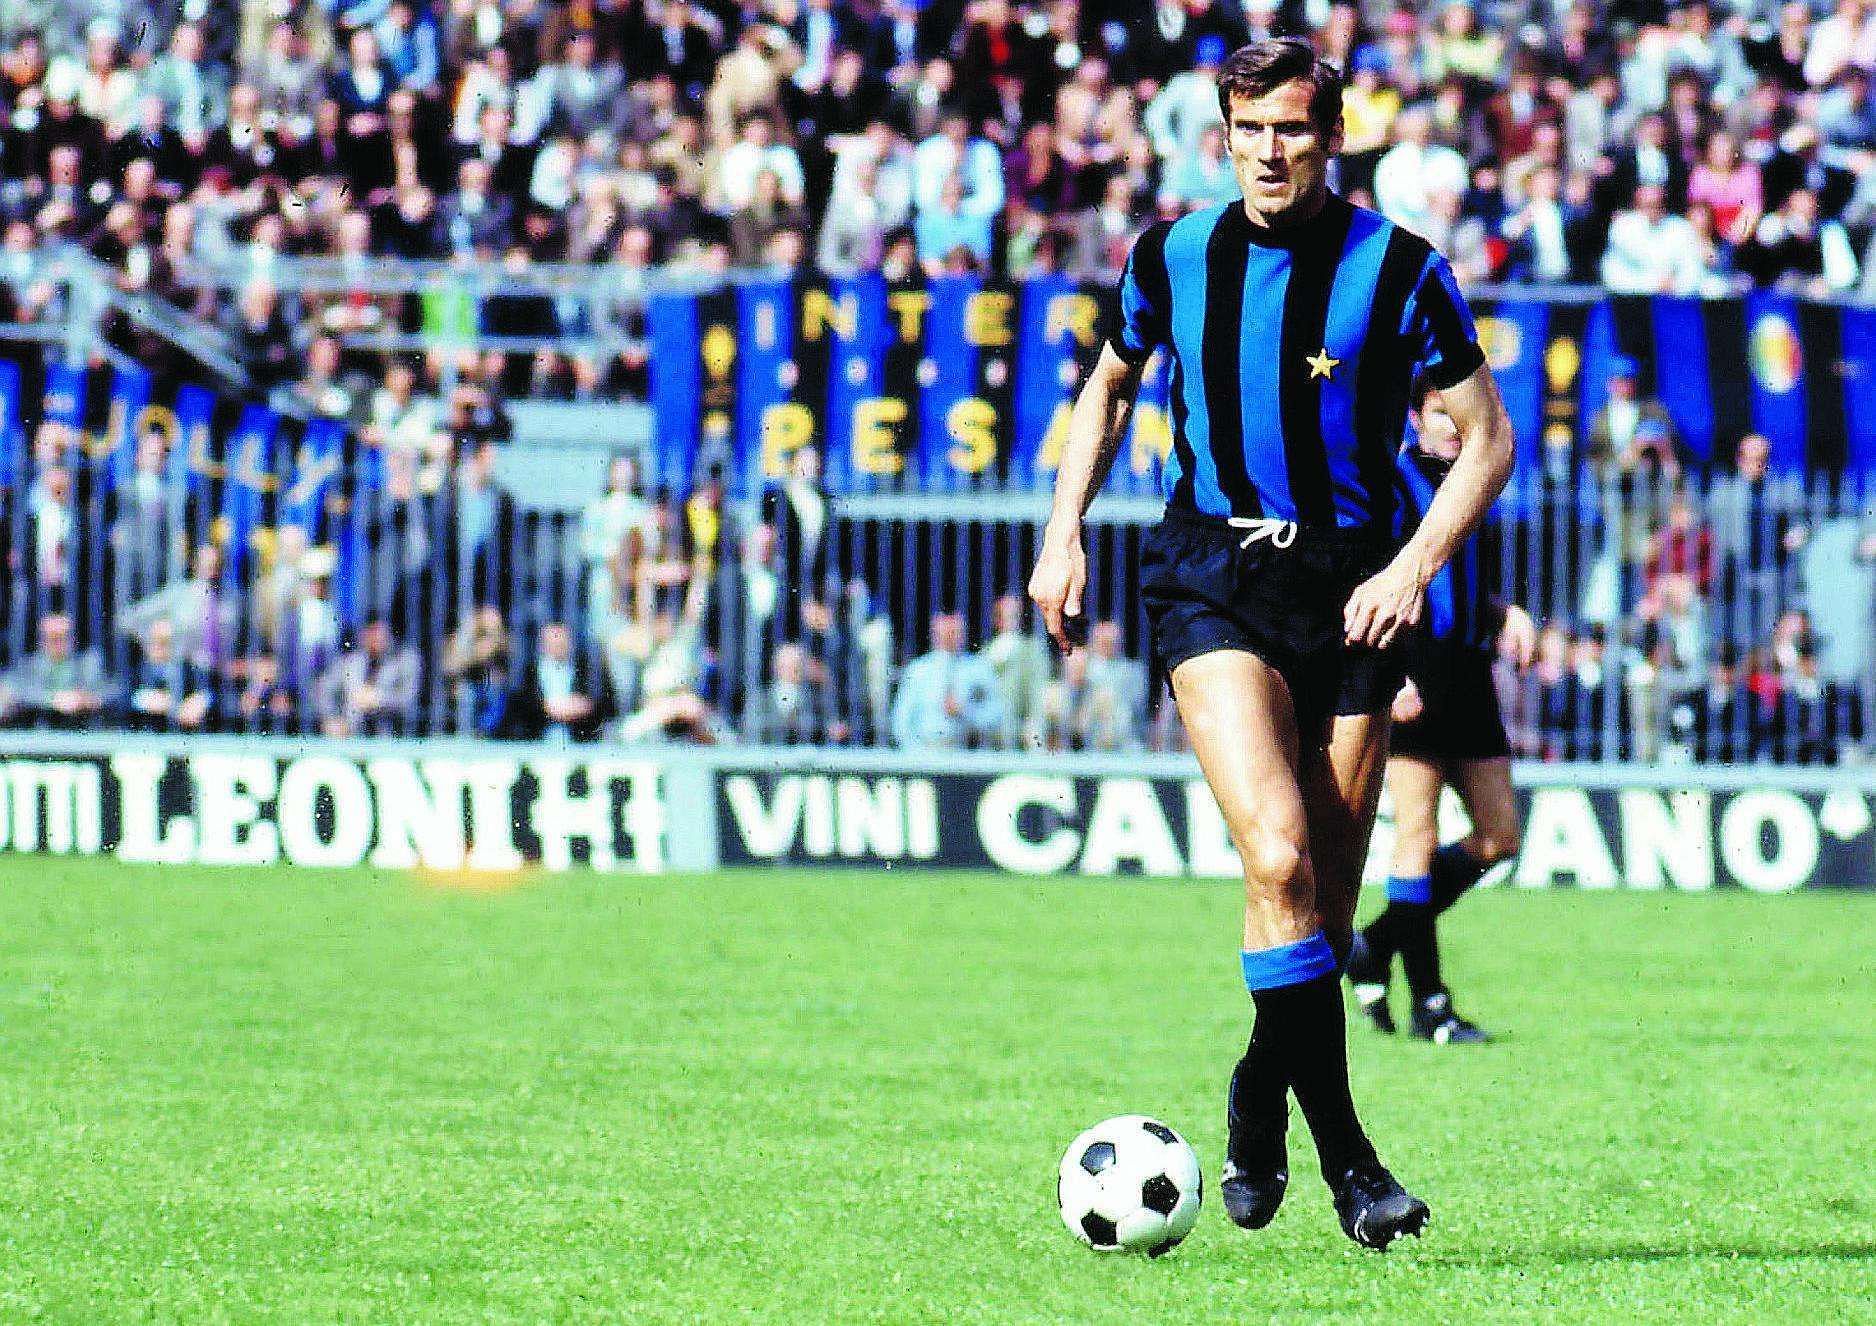 Giacinto Facchetti in action for Inter Milan (cred:TheseFootballTimes)